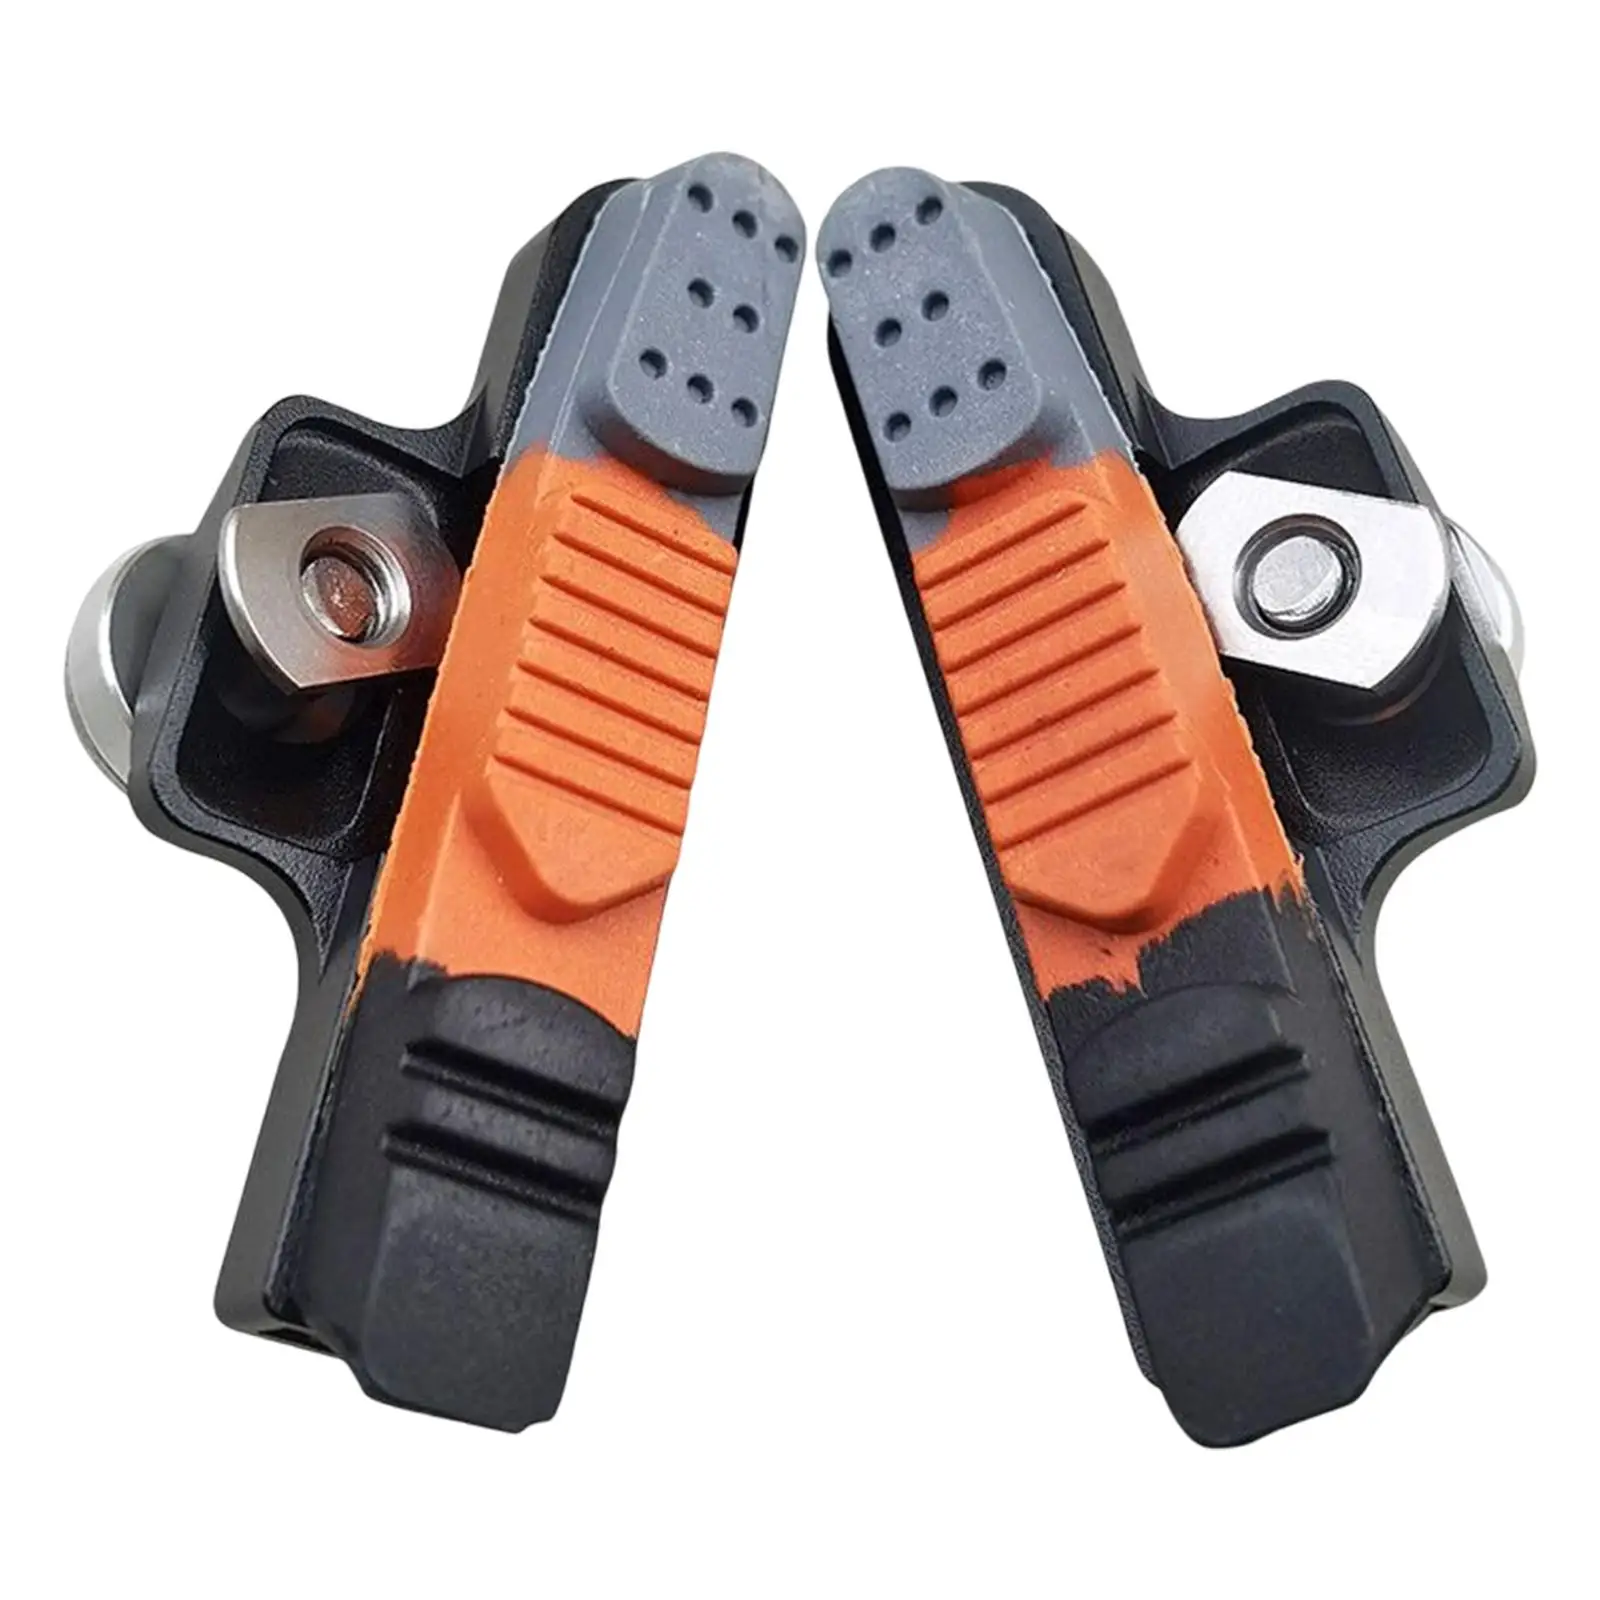 2Pcs 55 mm Brakes Pads Replacements Caliper Brake Blocks Set for Road Bikes Lightweight Durable High Performance Bicycle Parts